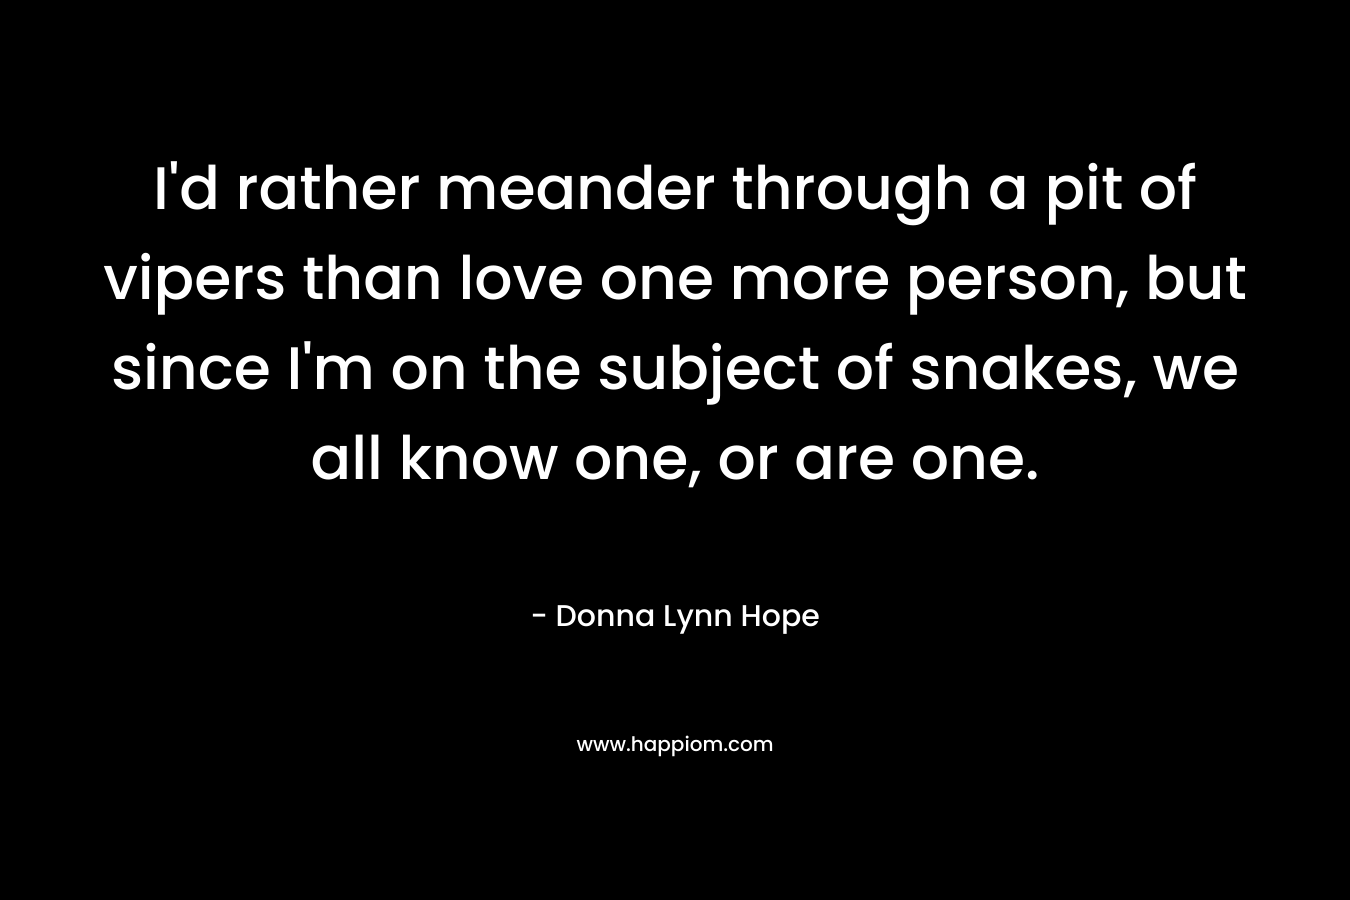 I’d rather meander through a pit of vipers than love one more person, but since I’m on the subject of snakes, we all know one, or are one. – Donna Lynn Hope